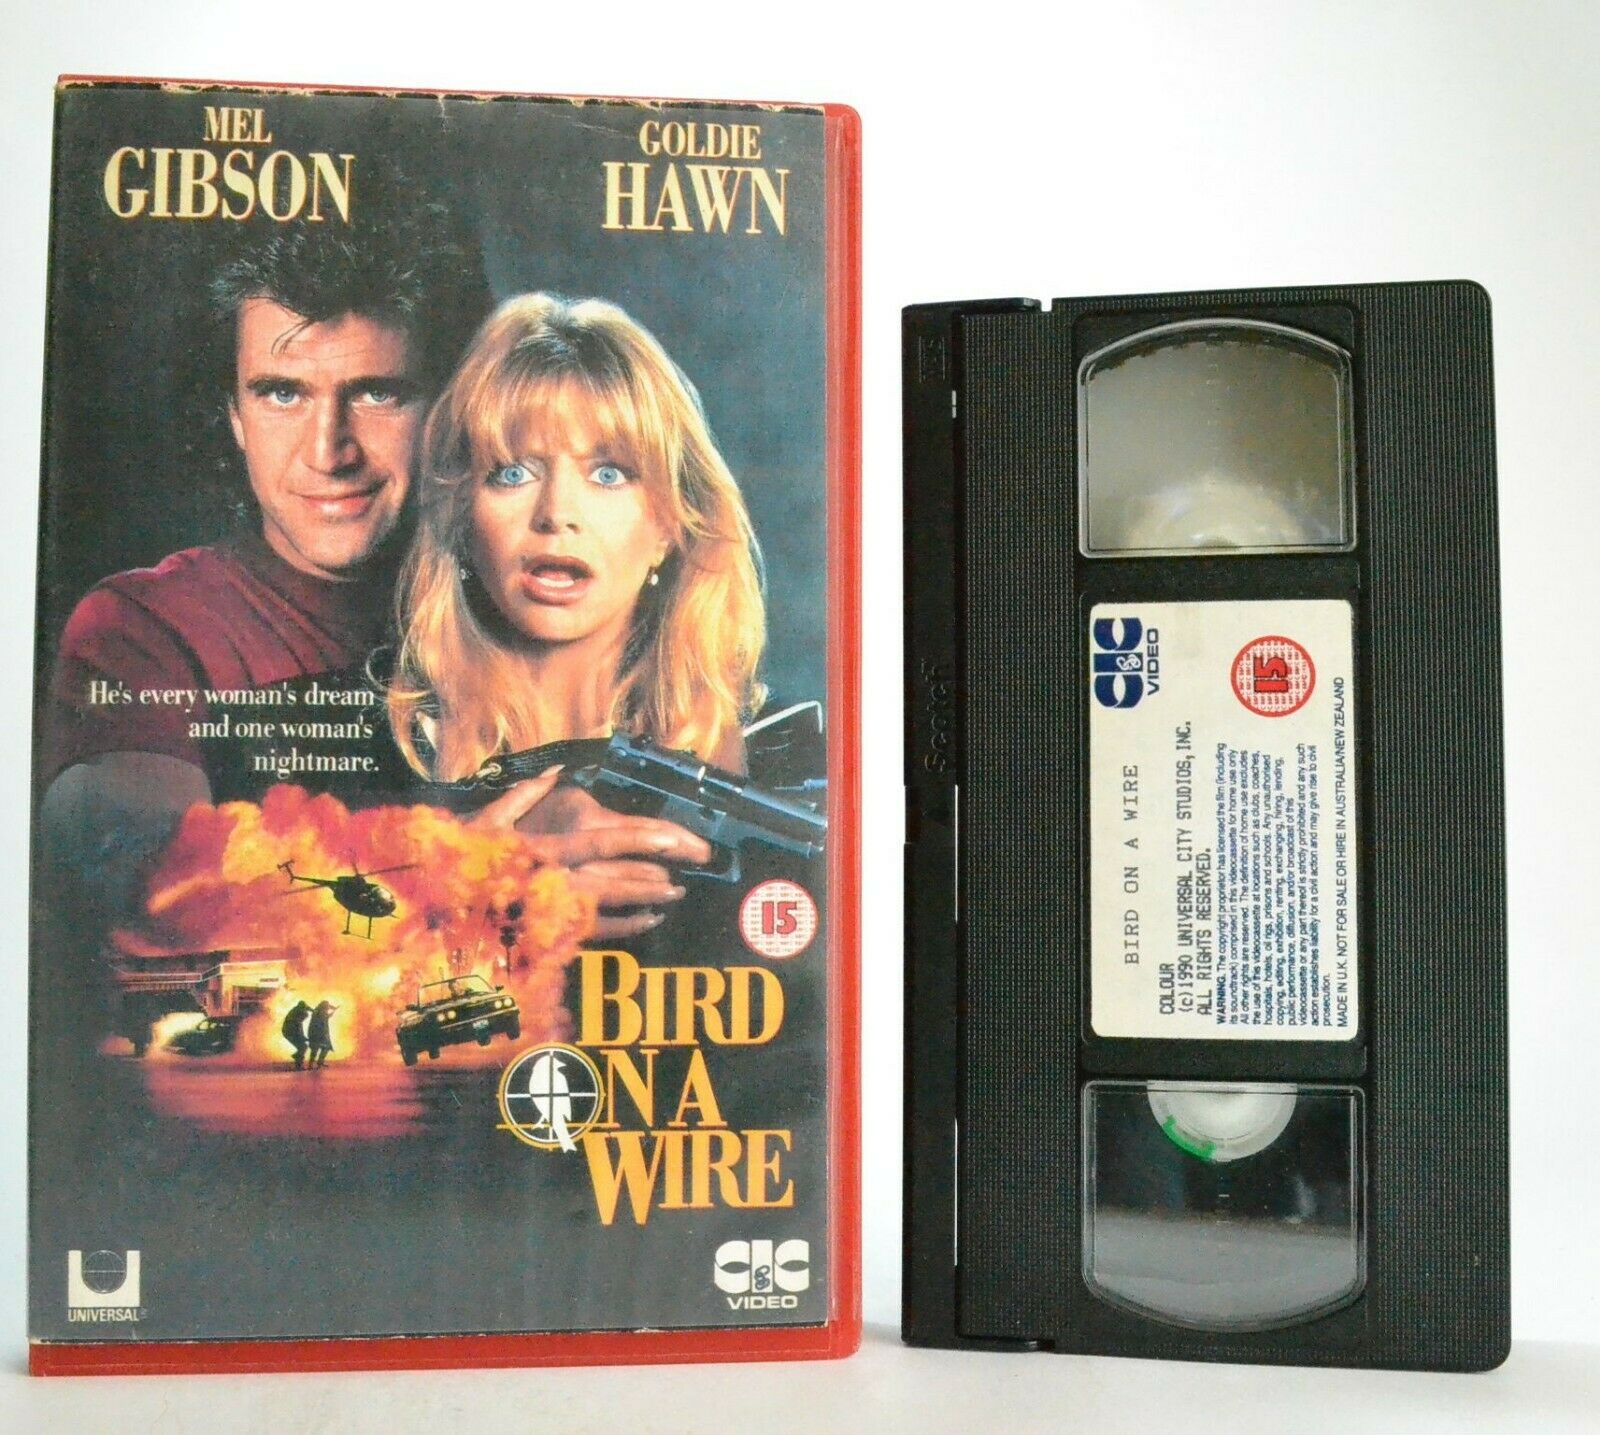 Bird On A Wire: Mel Gibson/Goldie Hawn - Action Comedy (1990) - Large Box - VHS-